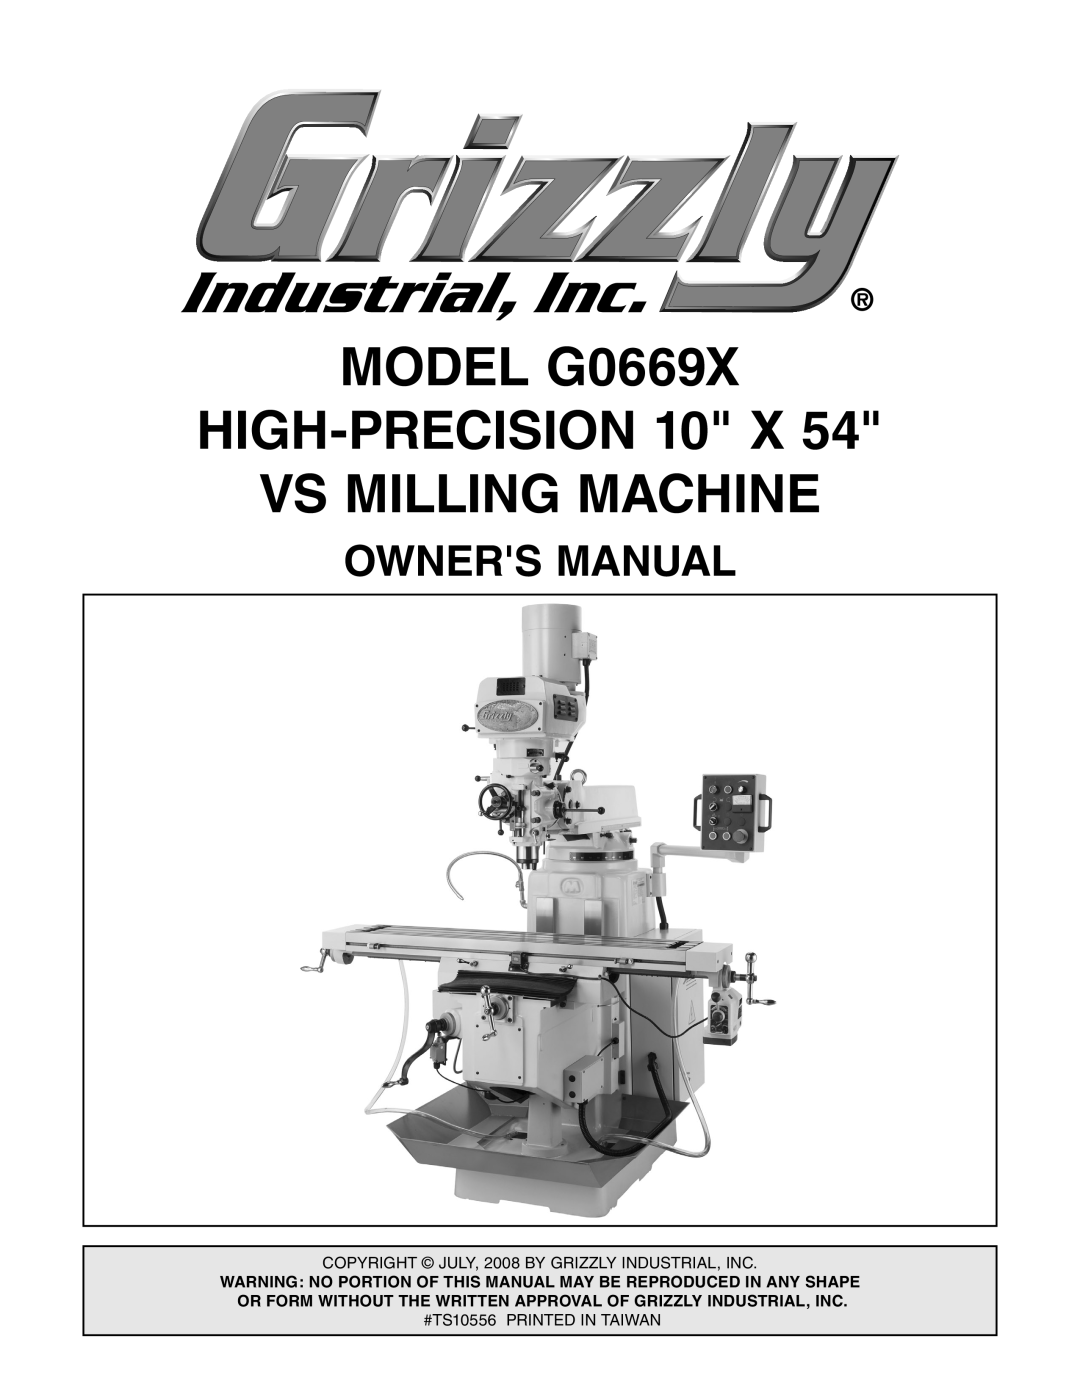 Grizzly g0669X owner manual MODEL G0669X HIGH-PRECISION 10 X VS MILLING MACHINE, OWNERS ManuaL 